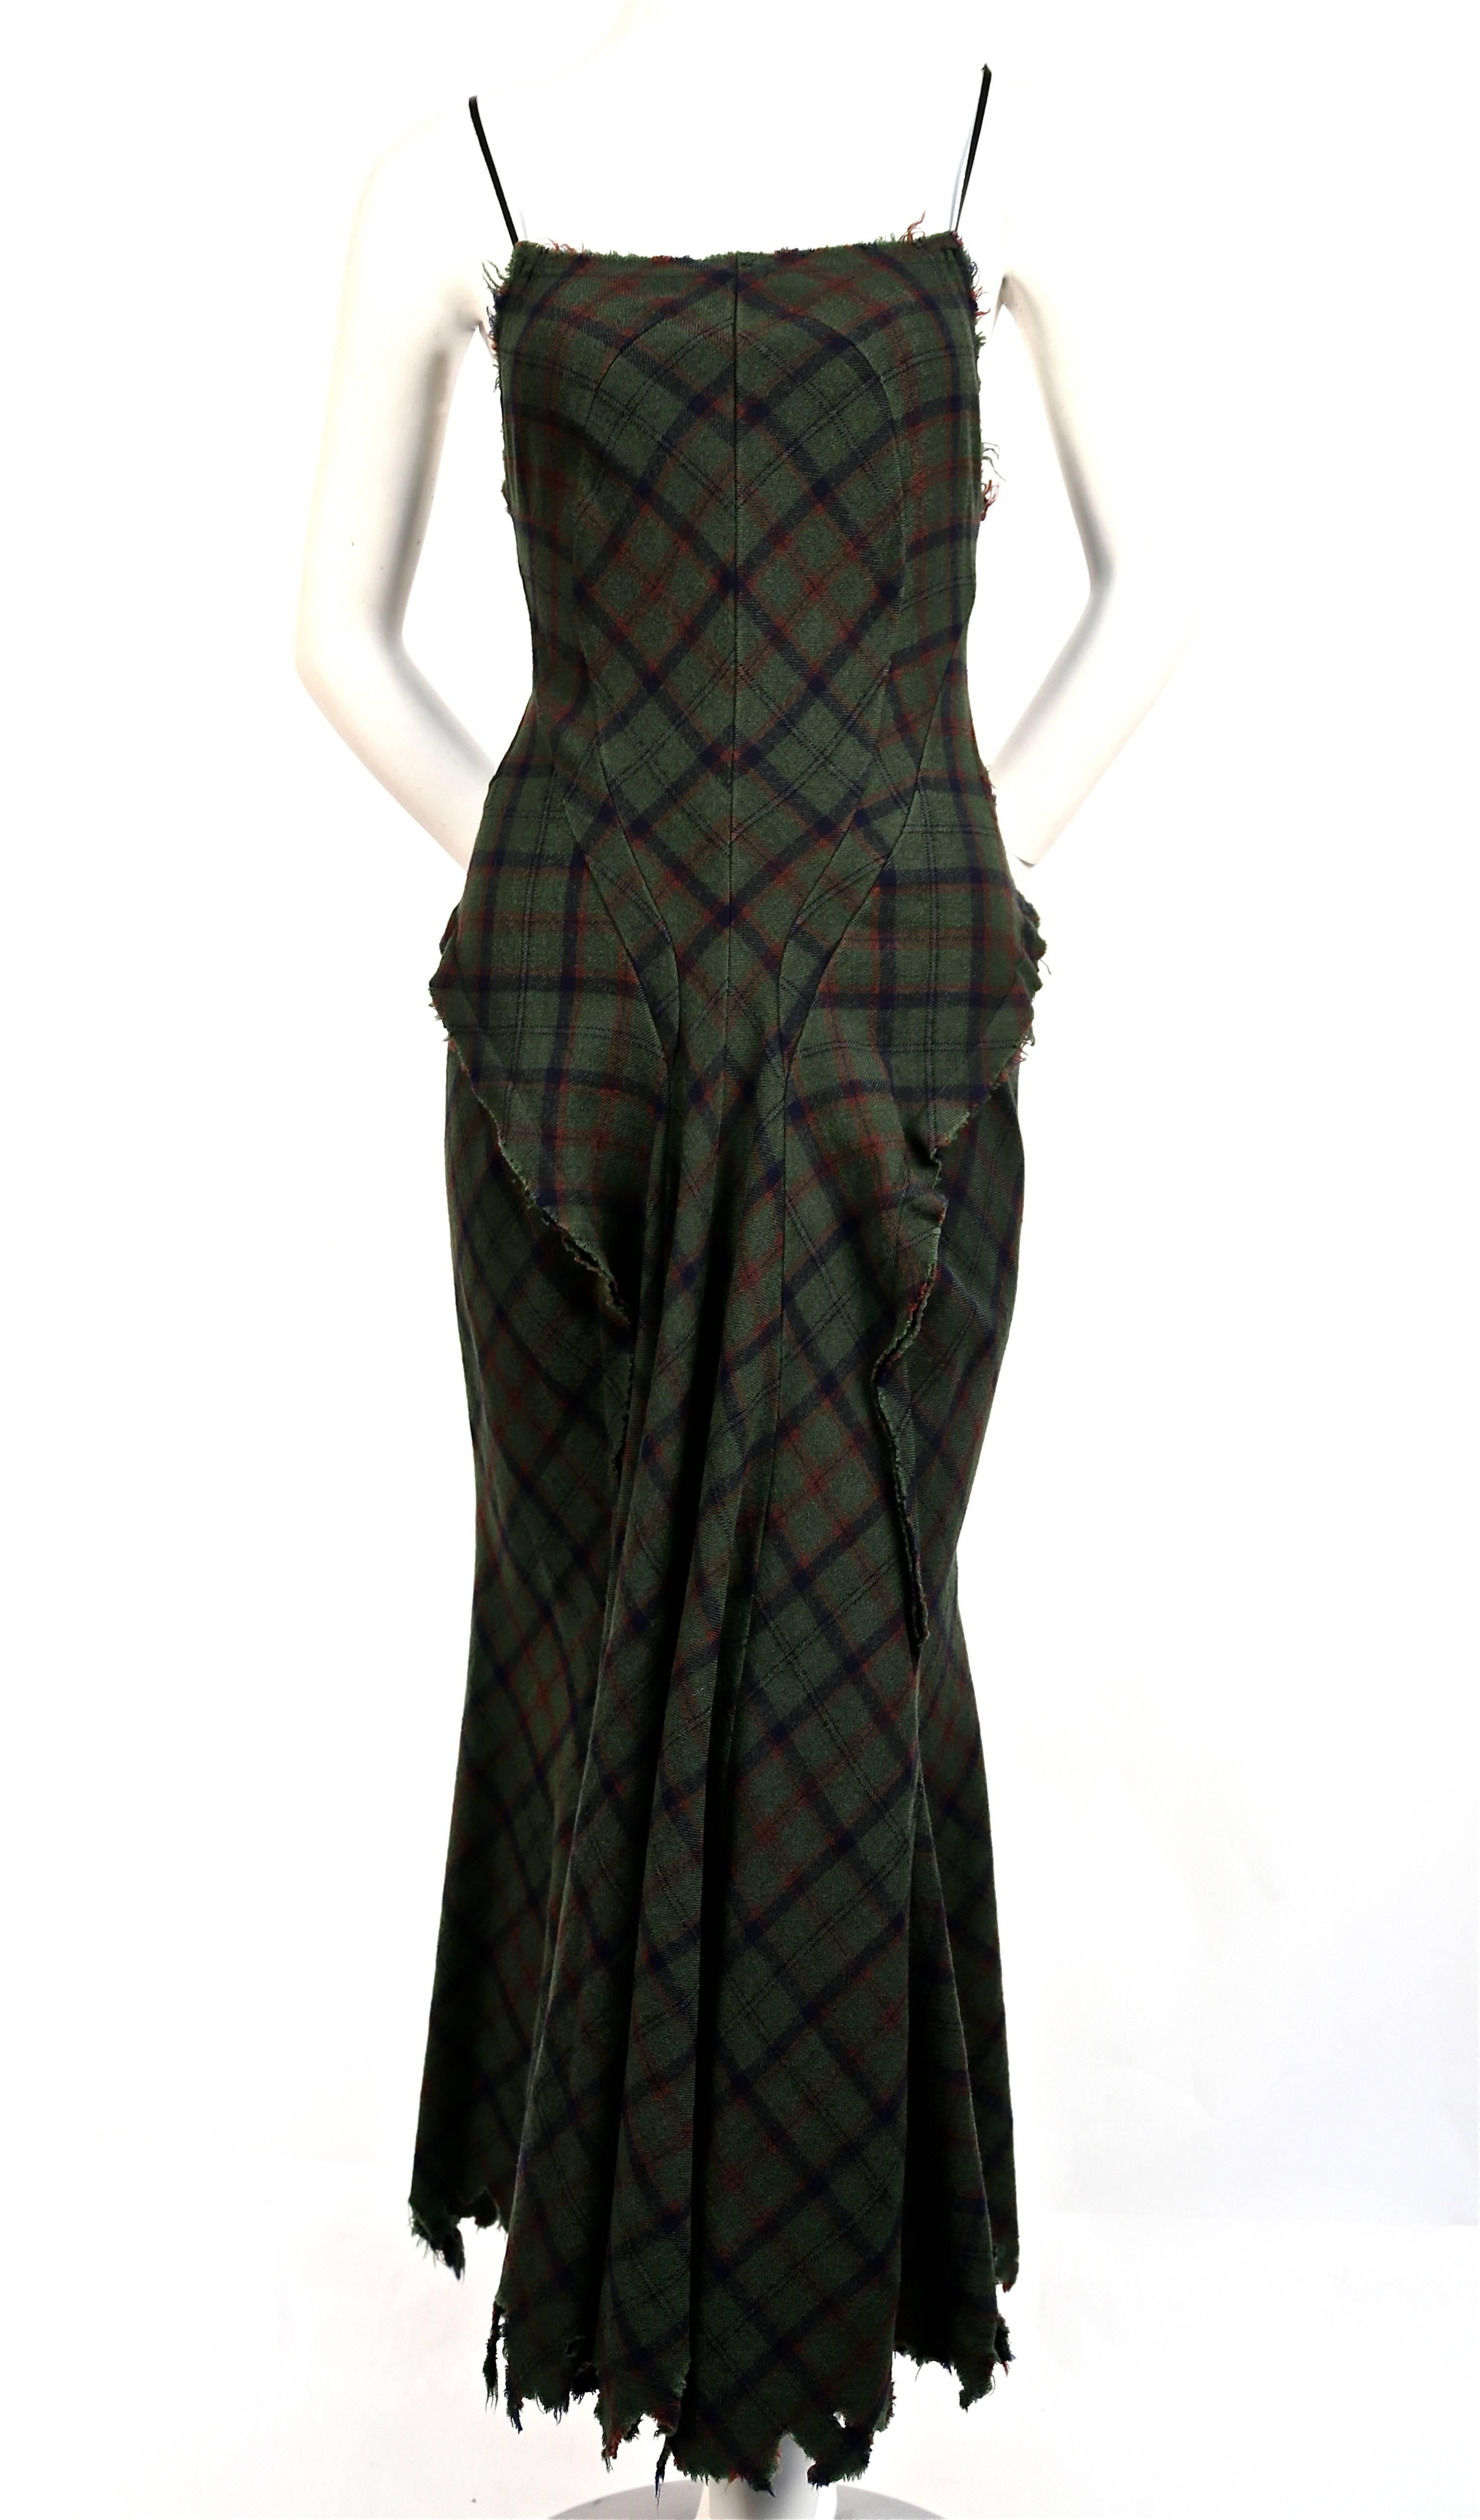 Green plaid bias cut intentionally tattered dress with cut out back by Junya Watanabe for Comme Des Garcons as seen on the ruwnay for fall of 2002. Frayed hemline. Leather spagetti straps. Labeled a size 'M' but also fits a small. 100% wool. Zips